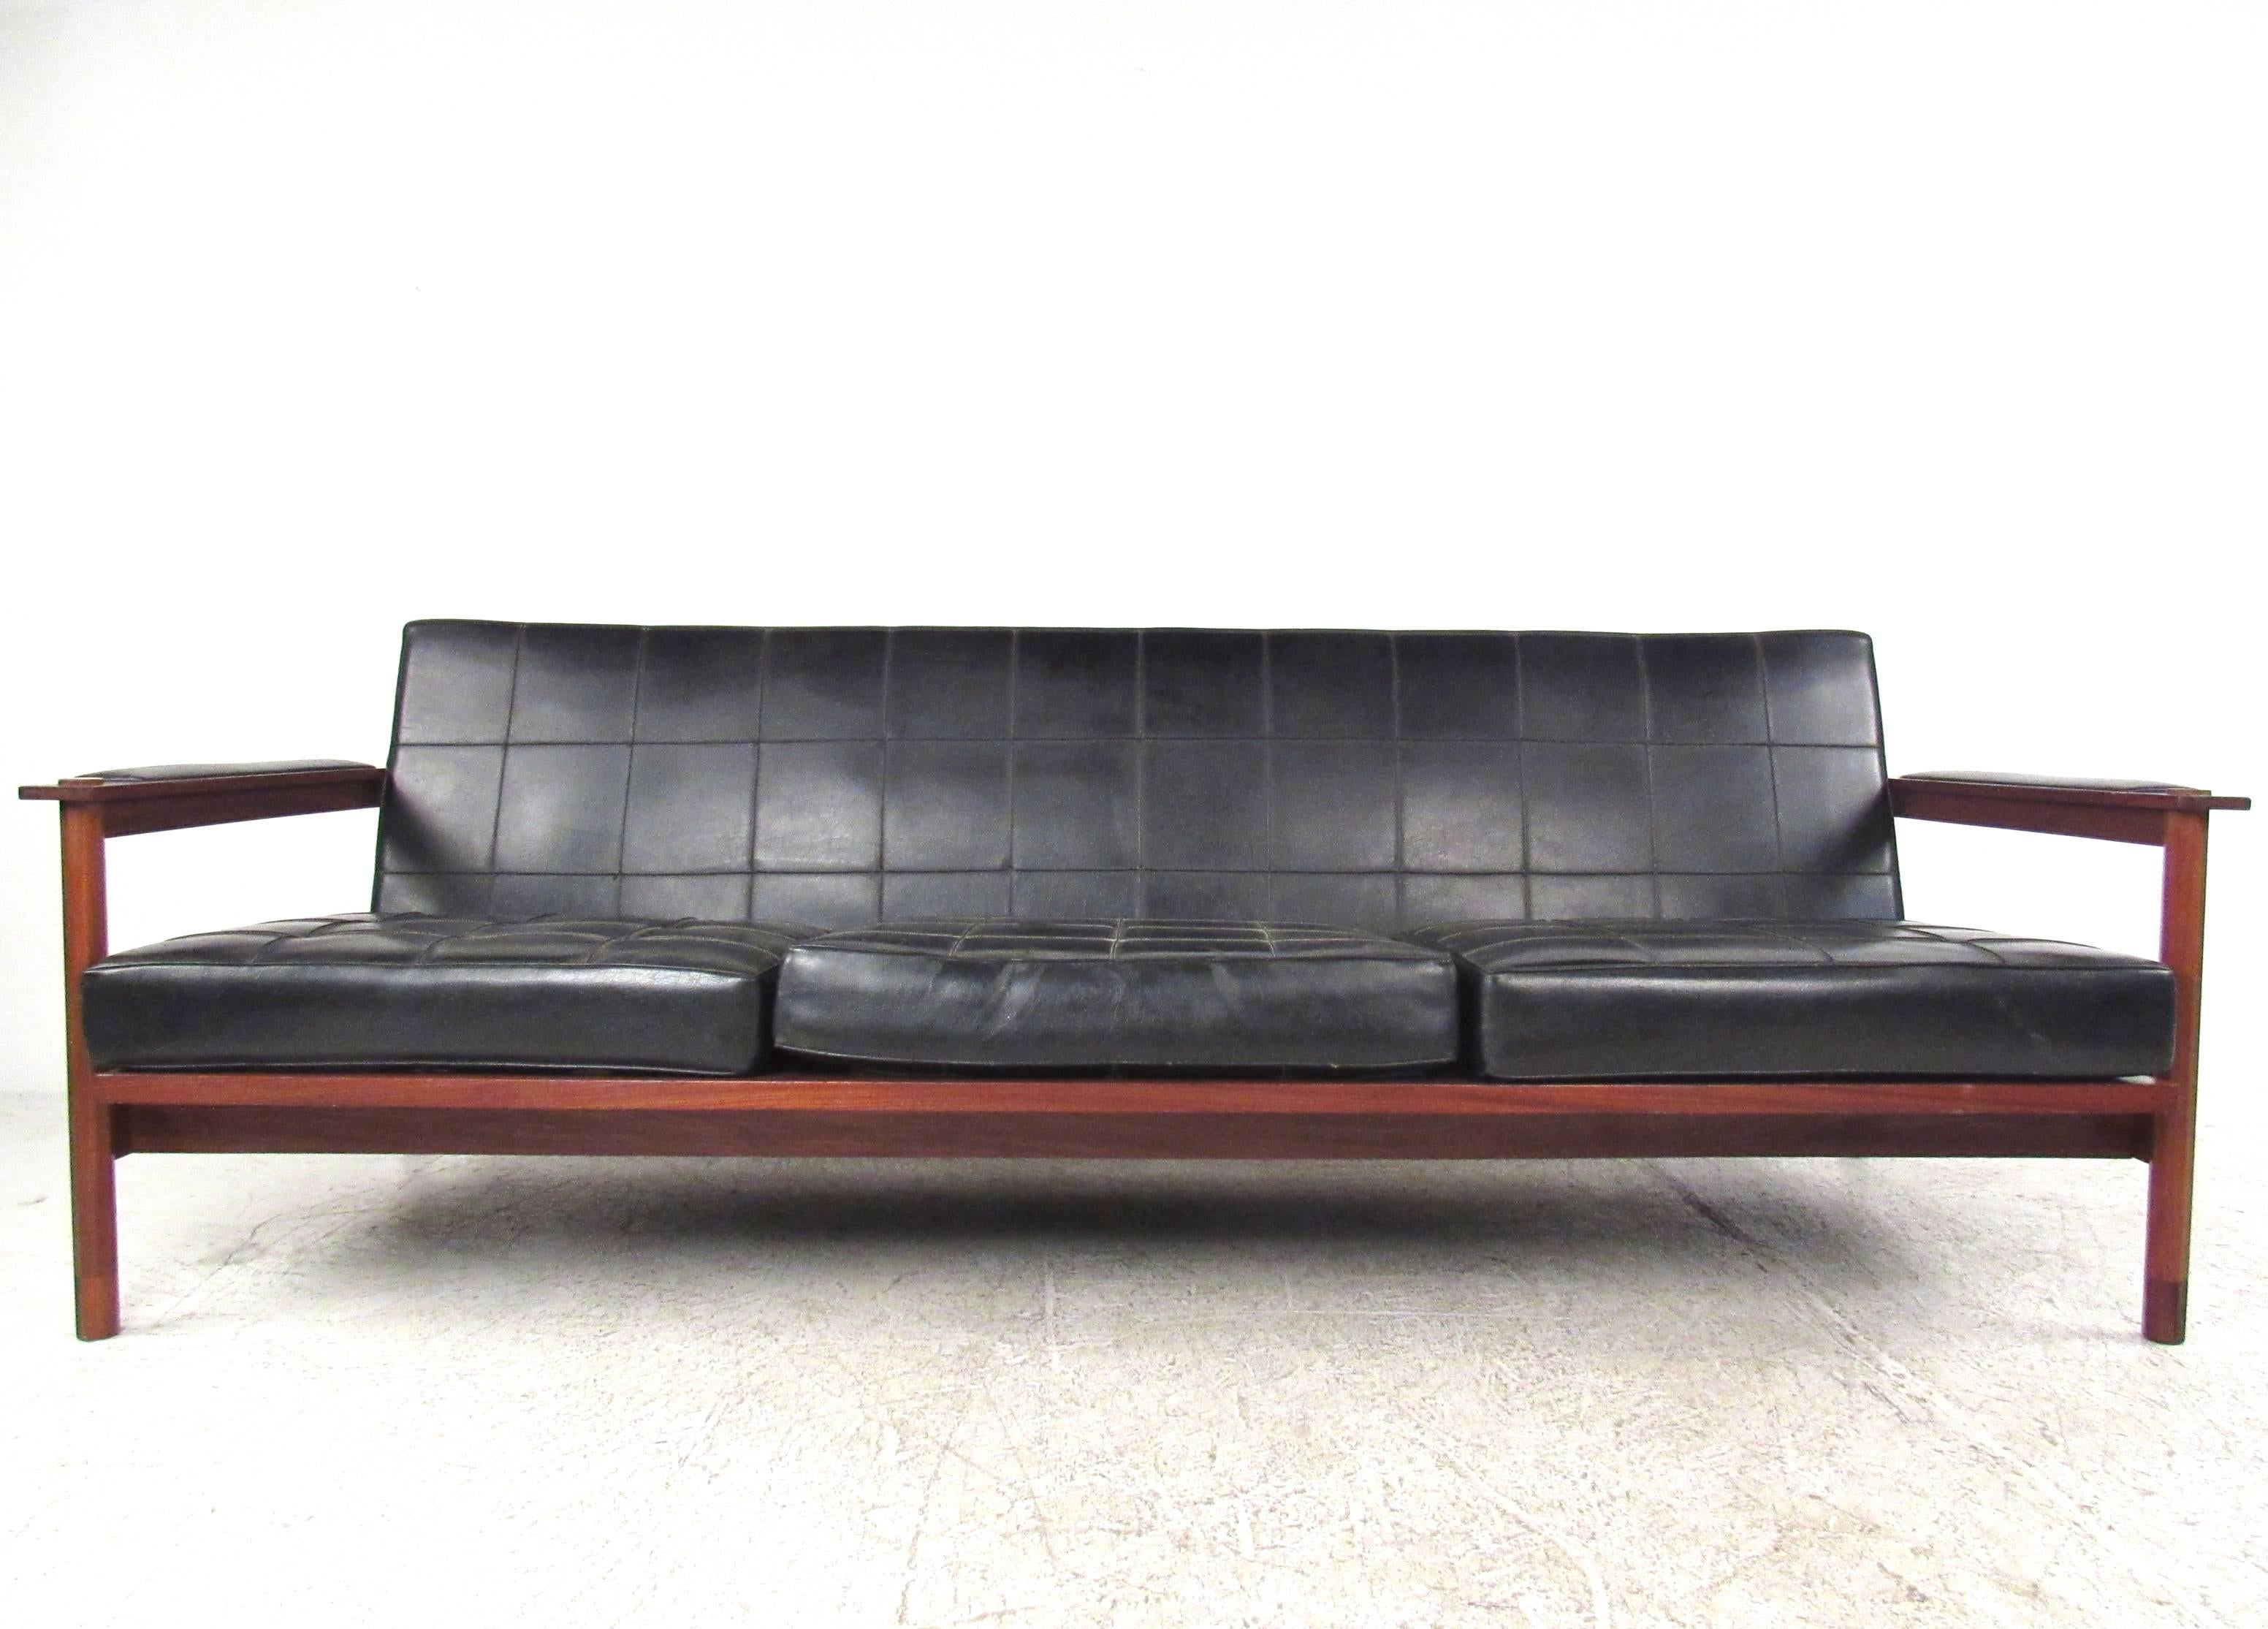 This unique slat back vinyl and walnut sofa features sleek Mid-Century style while making a comfortable addition to any interior. Rich natural finish, tufted vinyl, octagonal post construction, and adjustable seat back set apart this vintage couch.